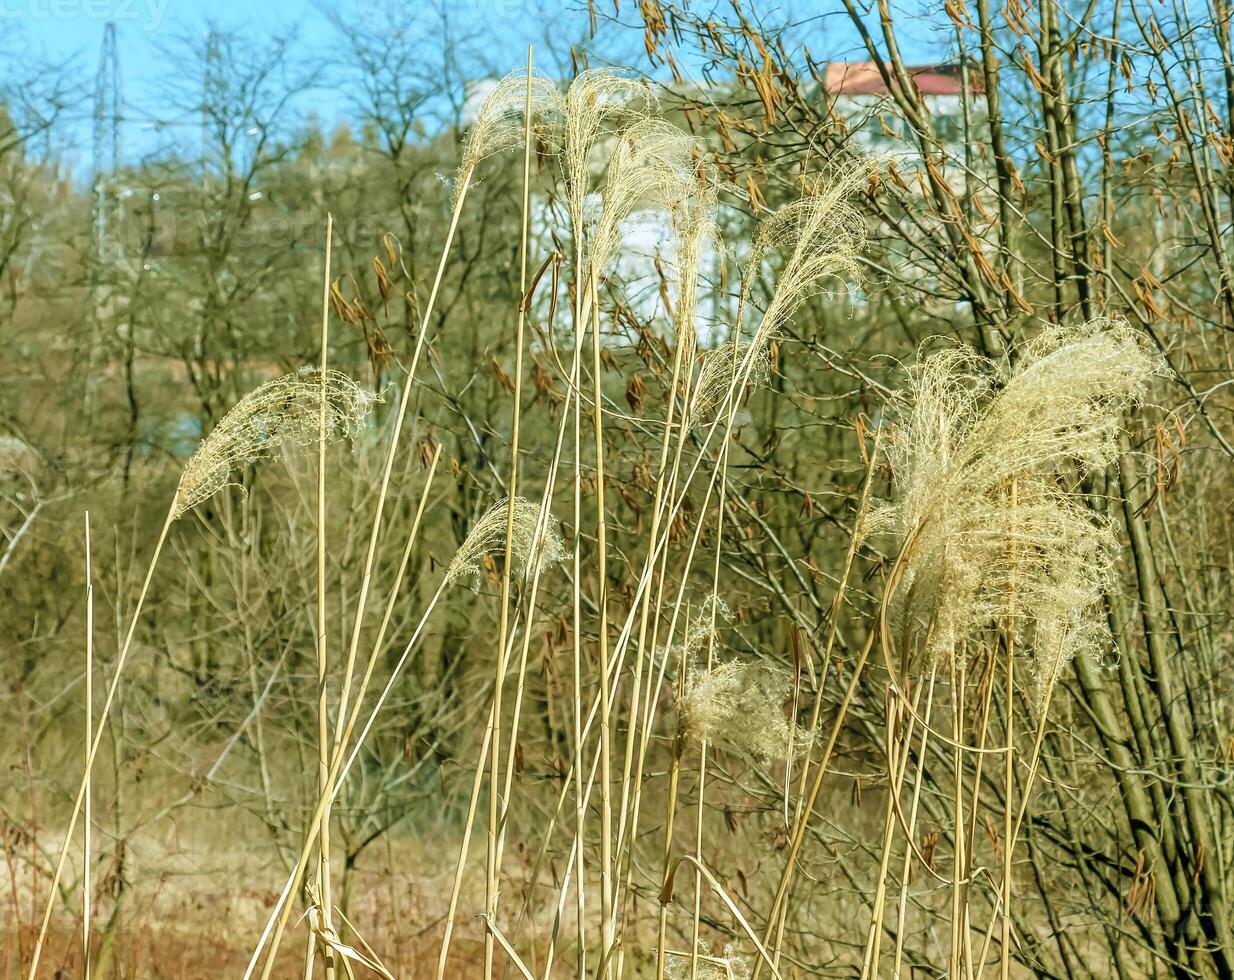 Dry grass background. Dry panicles of Miscanthus sinensis sway in the wind in early spring photo